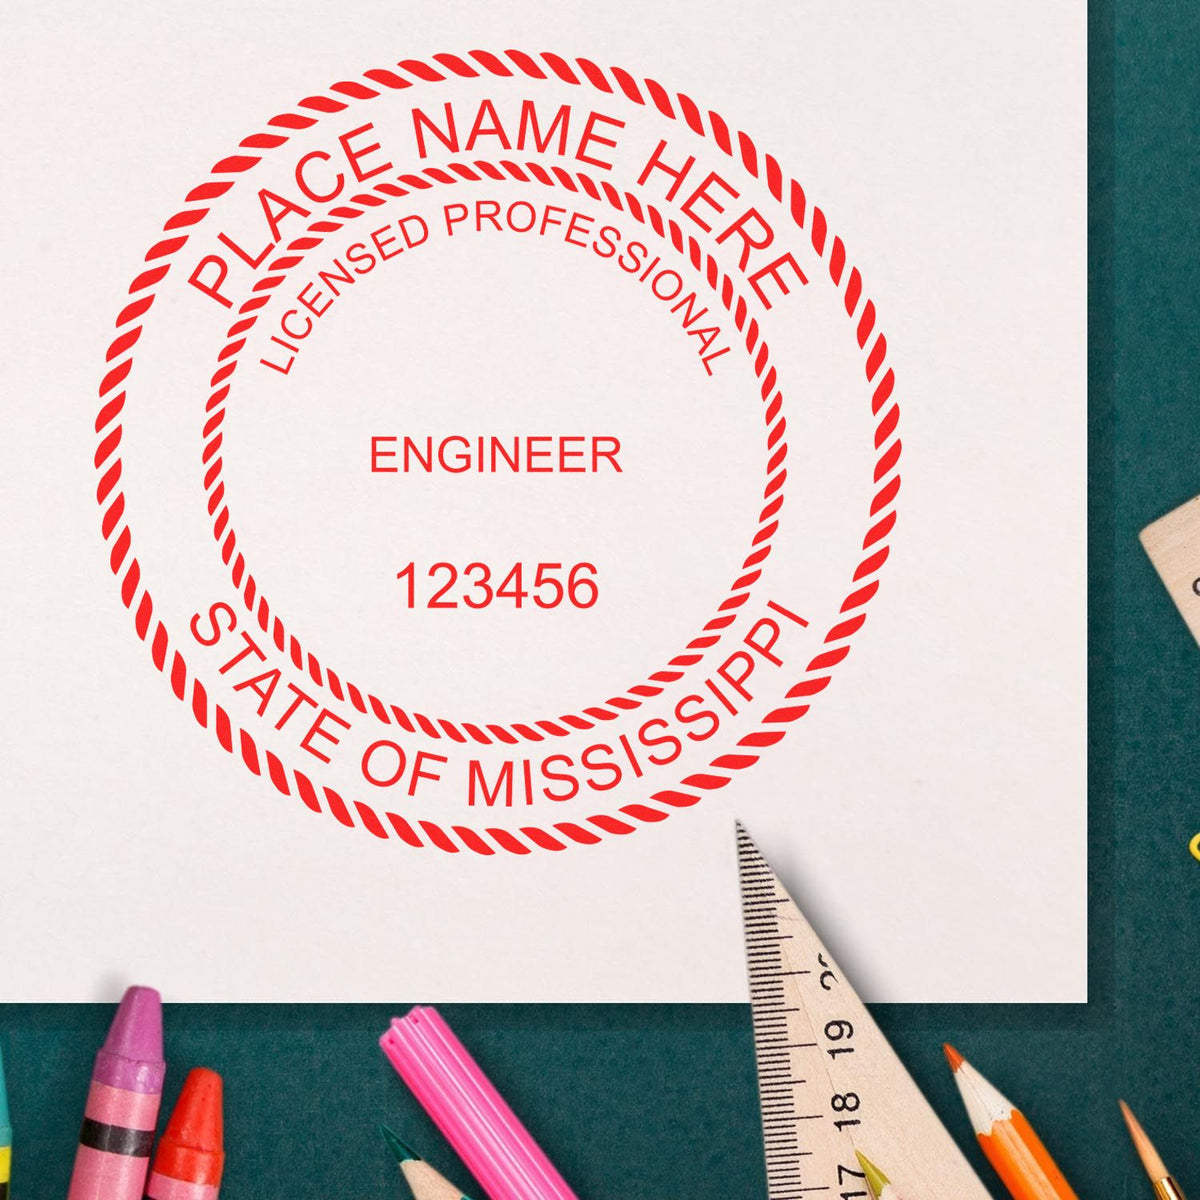 A photograph of the Digital Mississippi PE Stamp and Electronic Seal for Mississippi Engineer stamp impression reveals a vivid, professional image of the on paper.